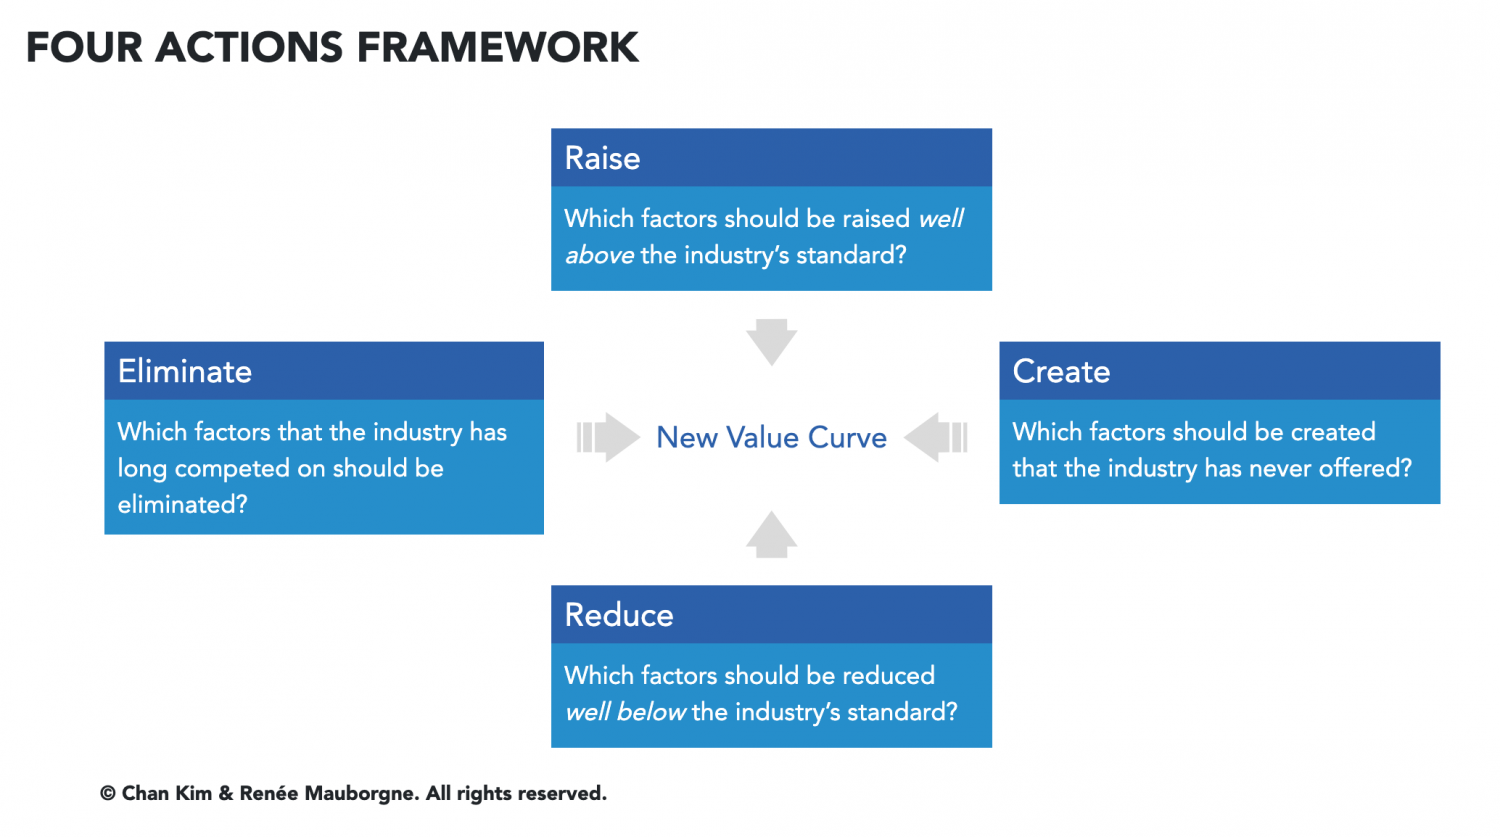 Four Actions Framework from the Blue Ocean Strategy